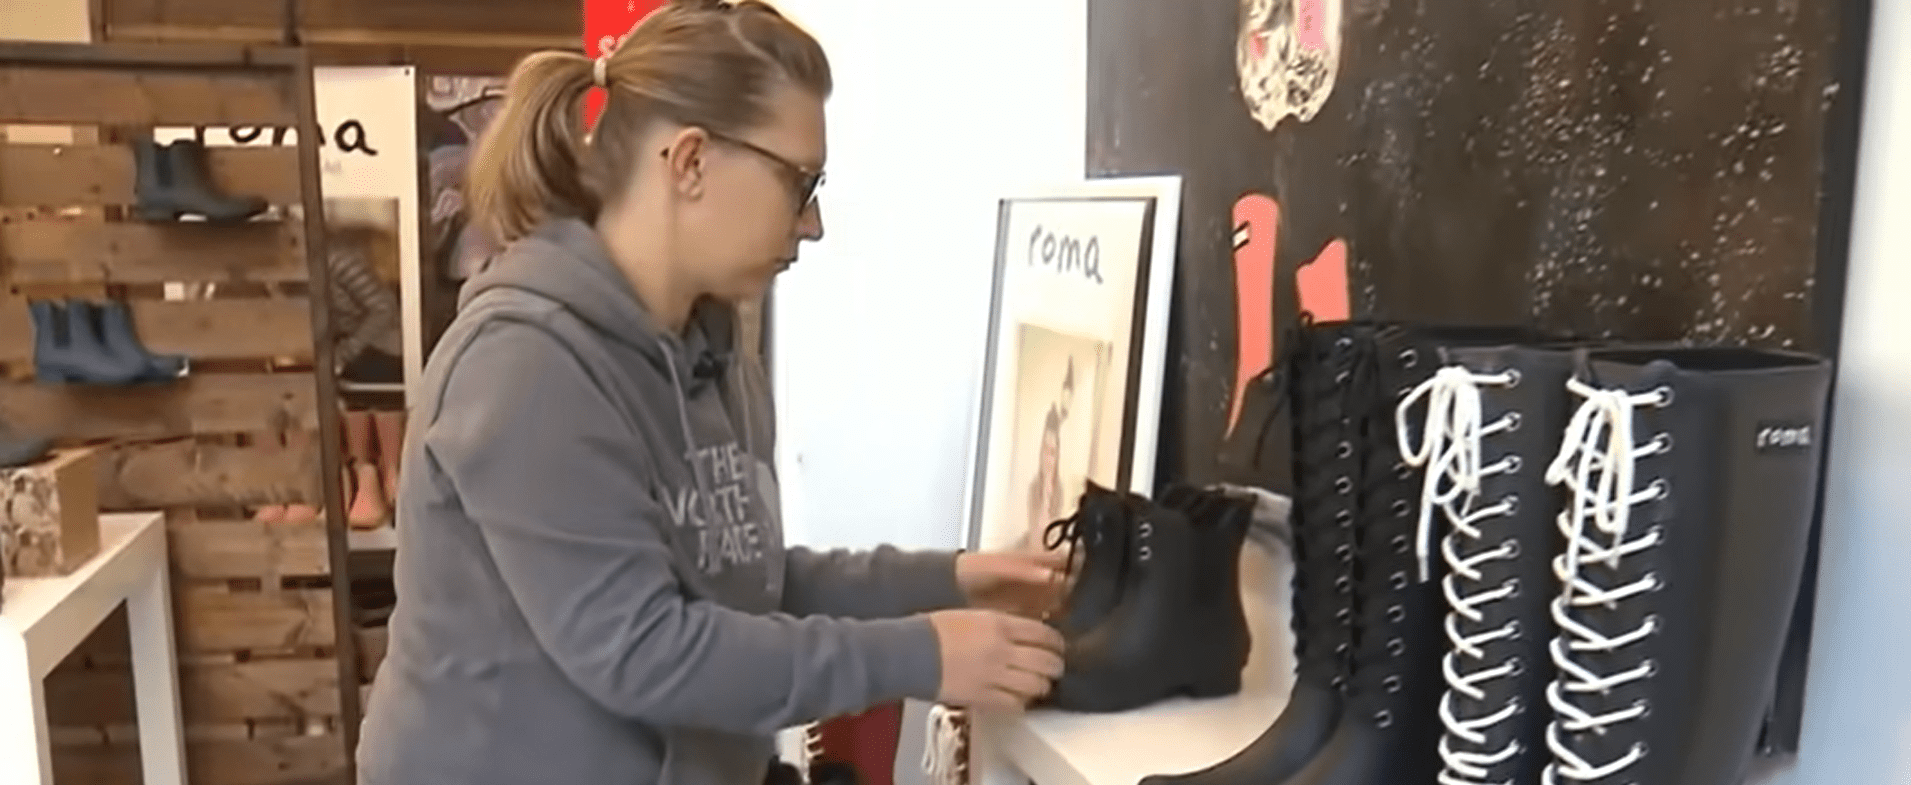 Ruth Balloon working at Roma Boots.│Source: youtube.com/CBSDFW